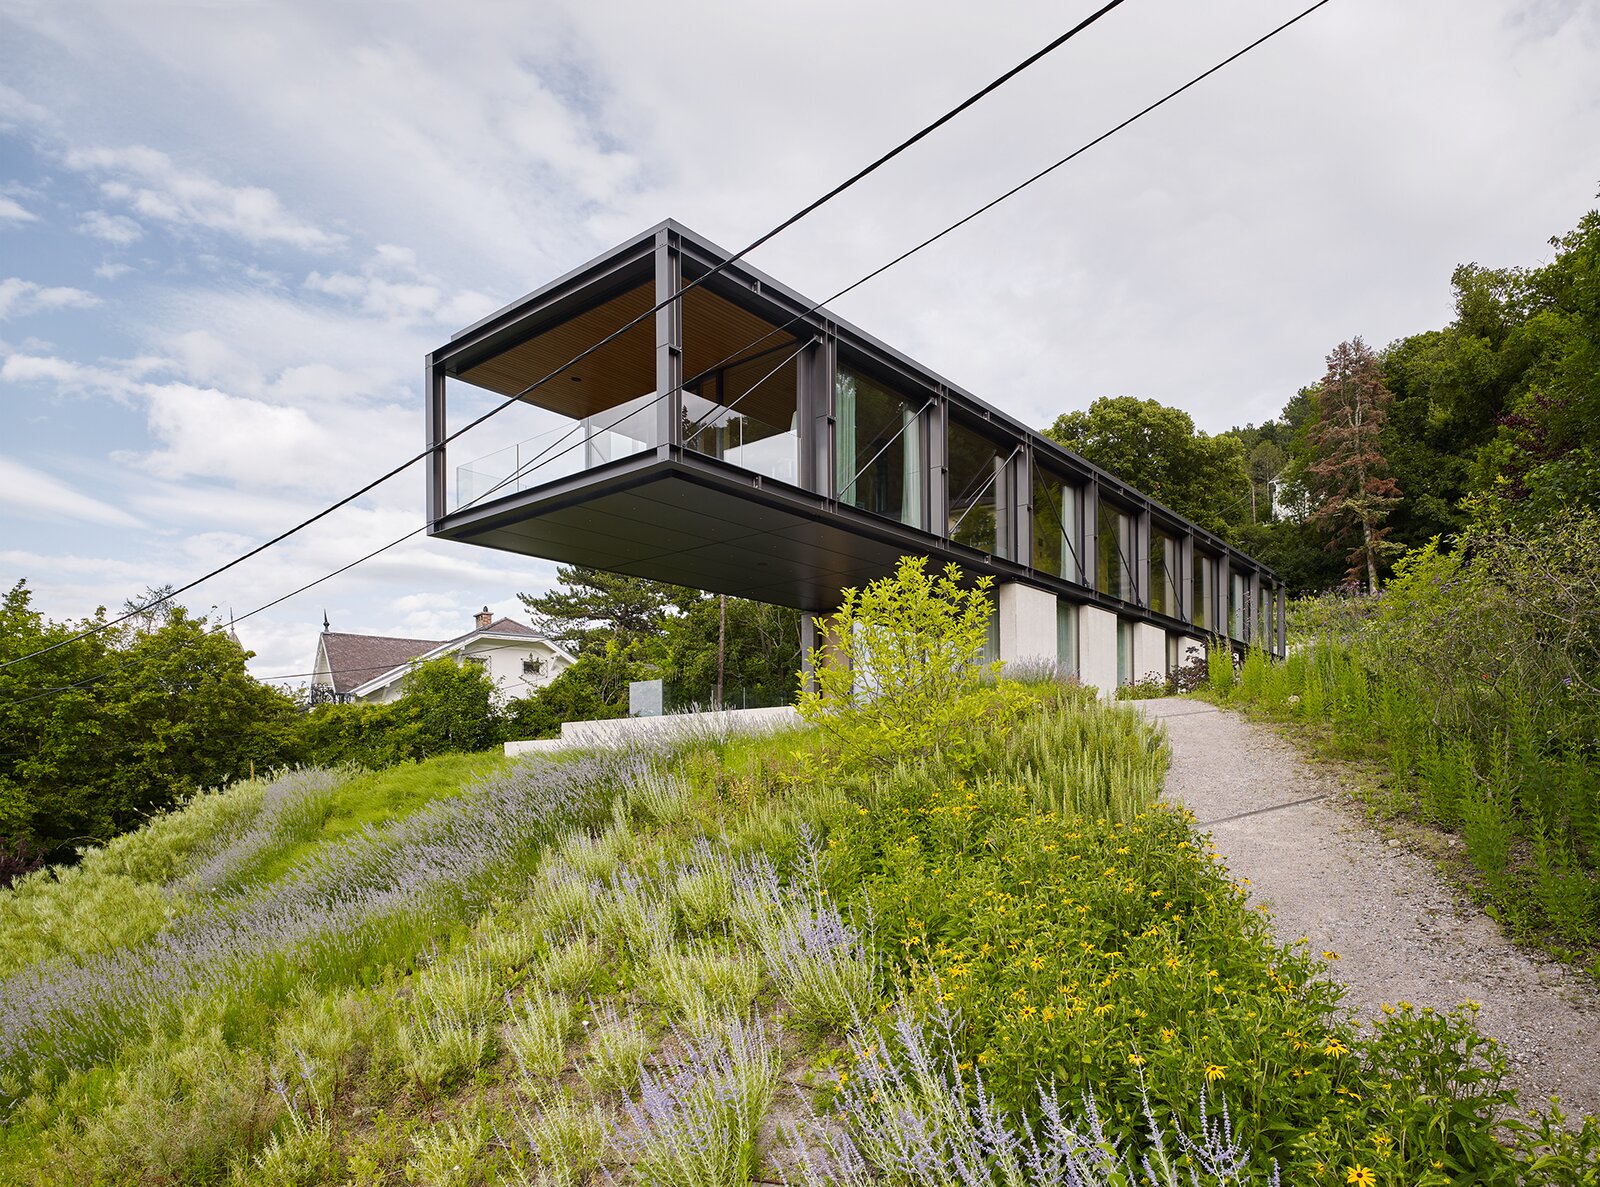 This Cantilevered Home in Austria Takes In All the Views